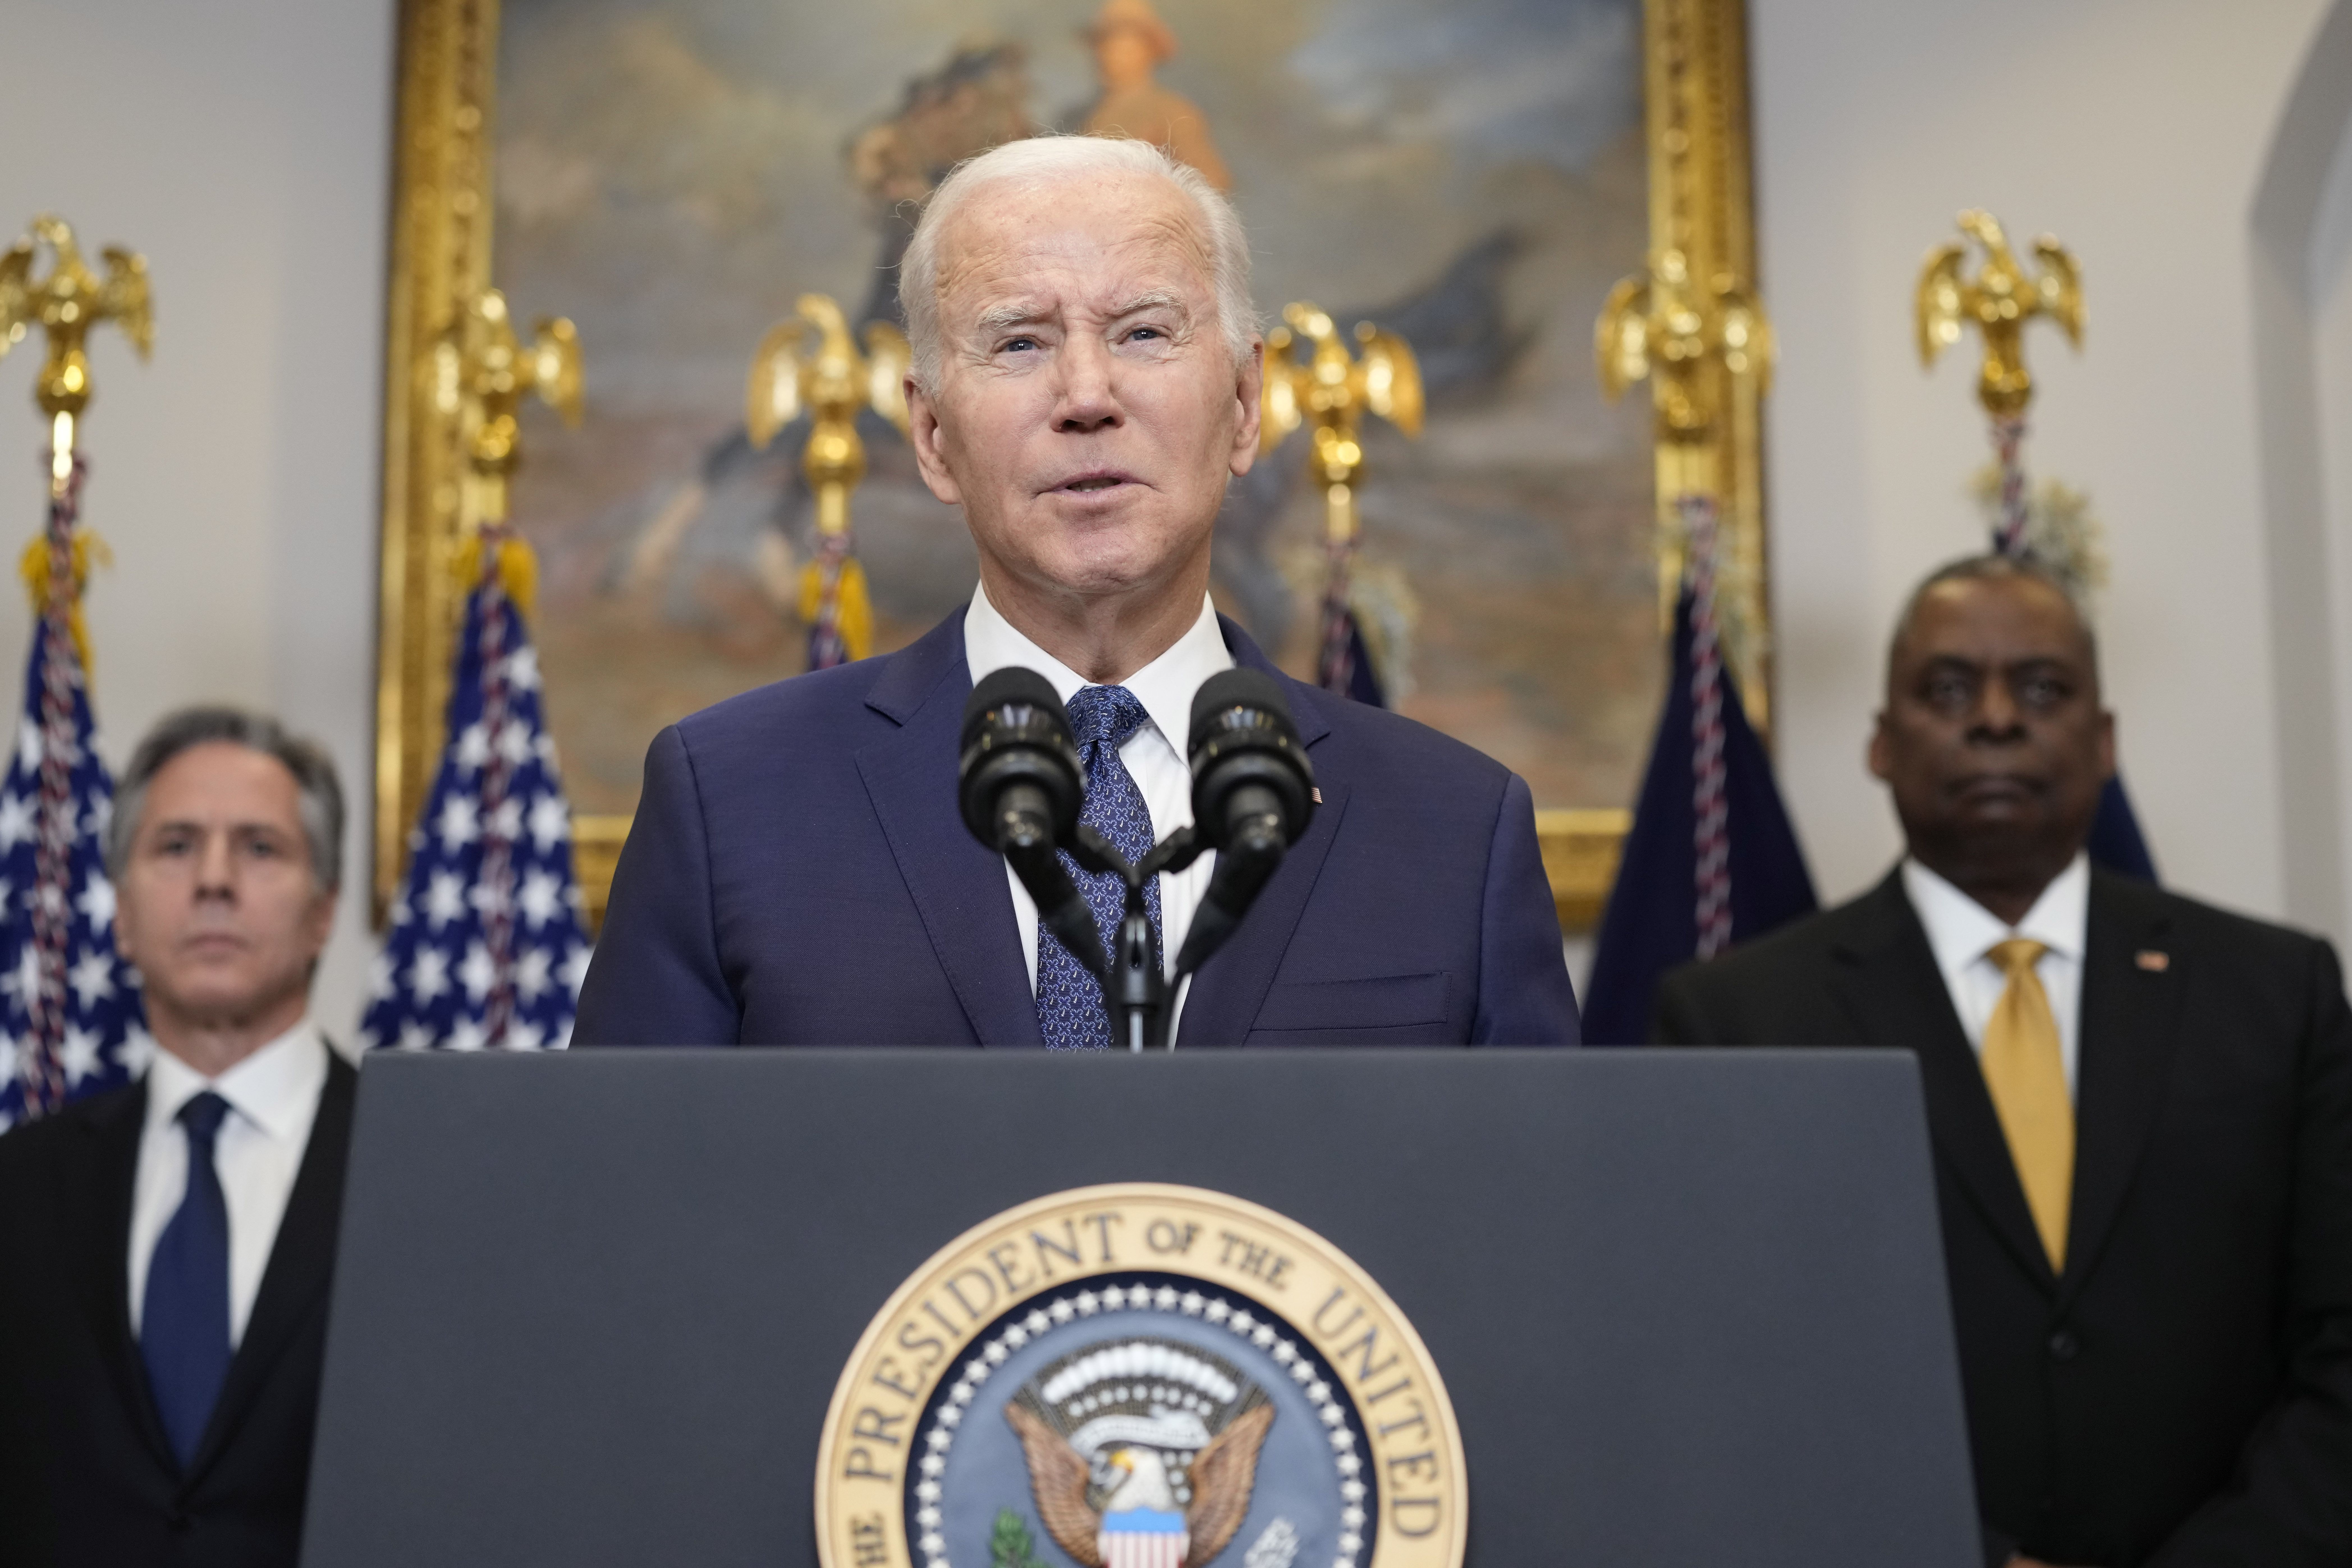 Biden is in the eye of the hurricane after it emerged that he improperly kept a series of classified documents in his home and office during his time as Barack Obama's vice president (2009-2017).  (AP)